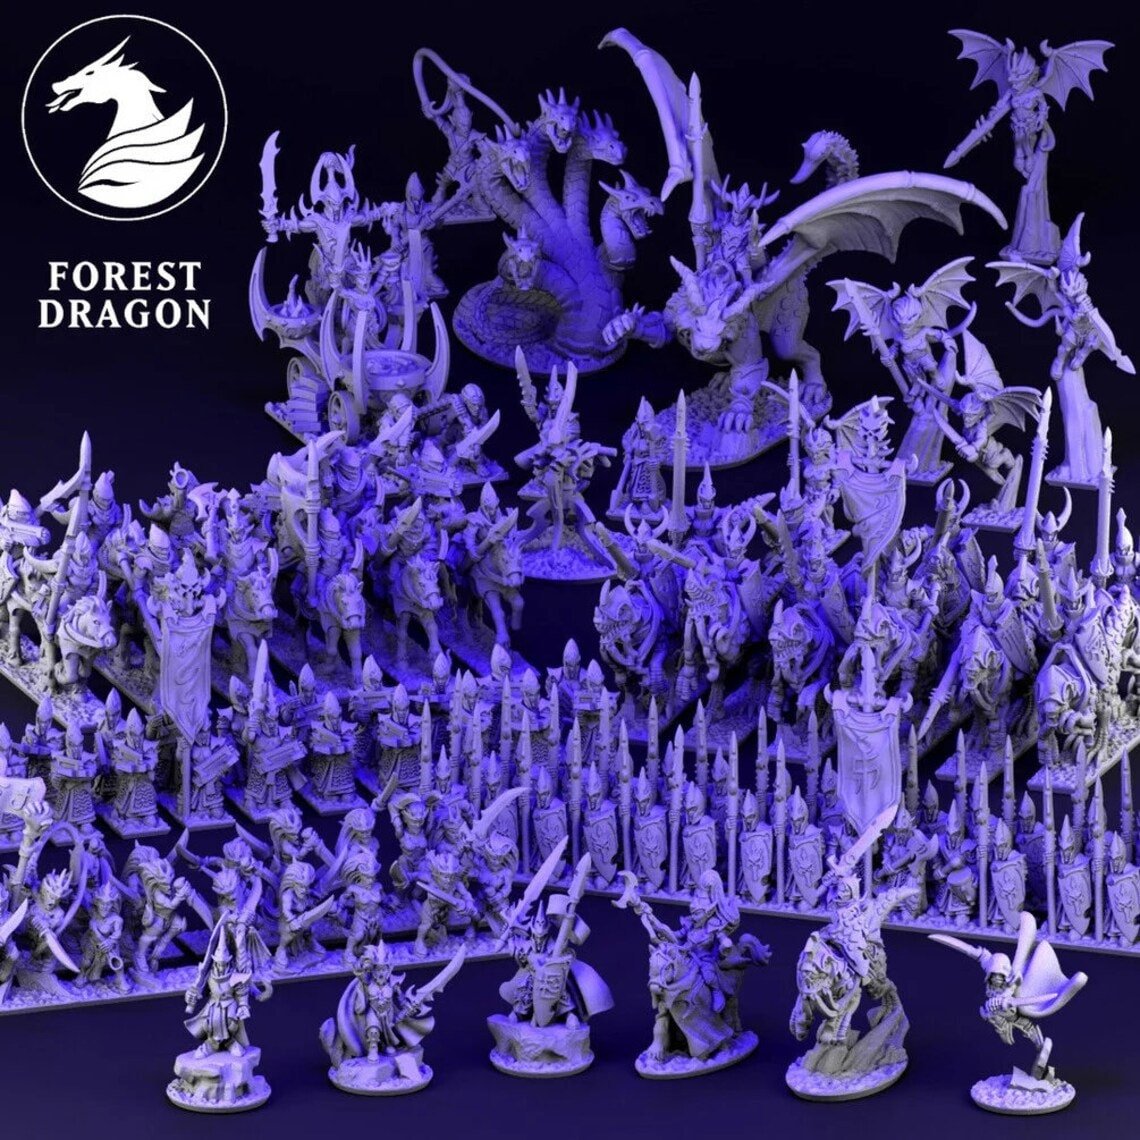 Dire Elves Mega Army for Warmaster designed by Forest Dragon 3D printed by Forgemaster Miniatures